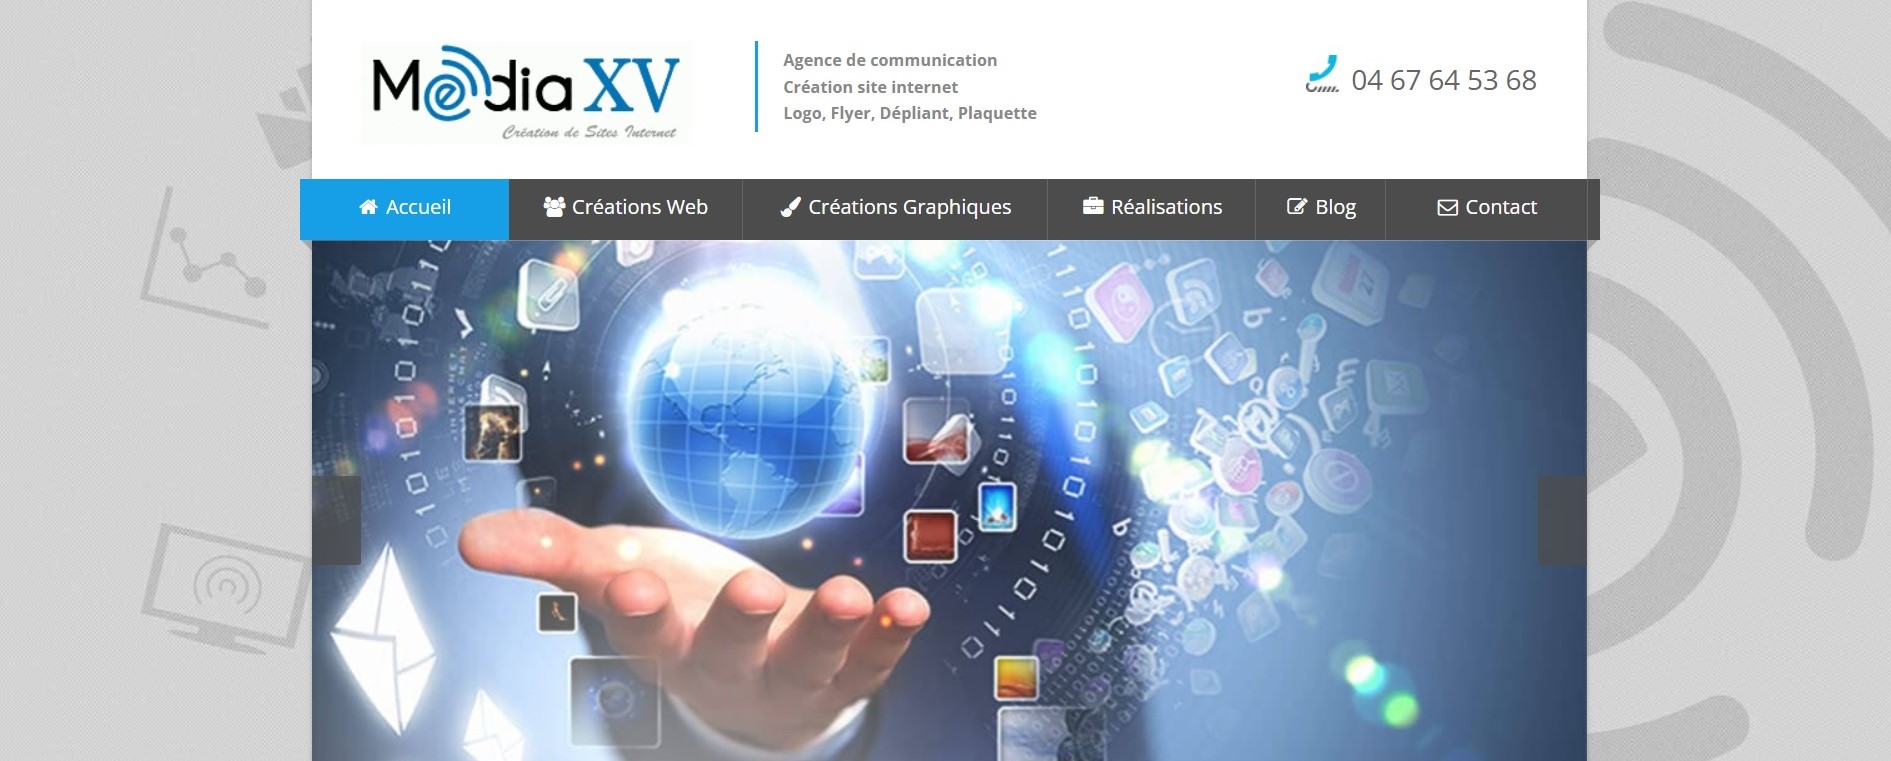  MediaXV - Agence Web à Montpellier 